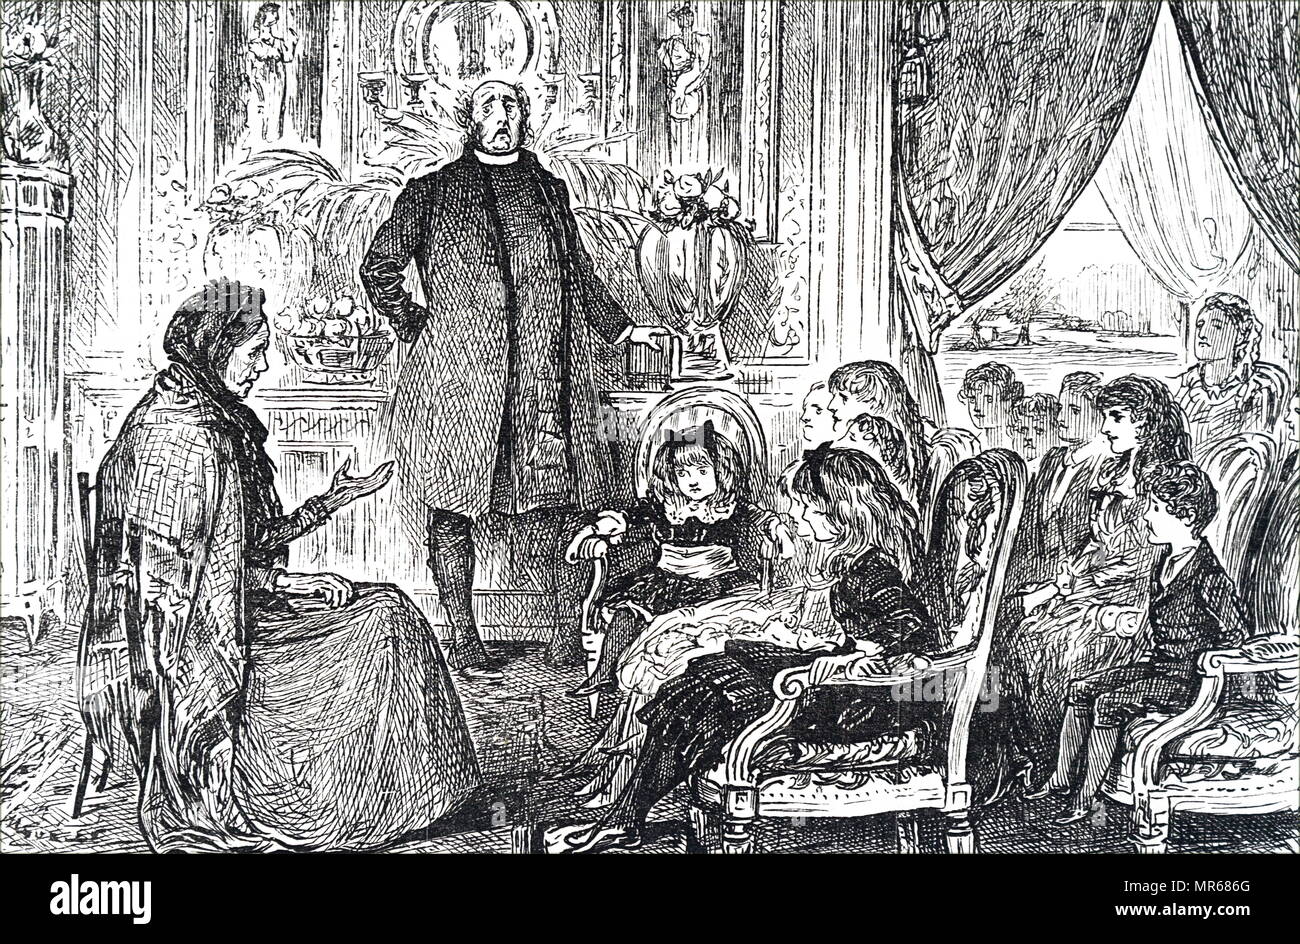 Illustration depicting a Sunday School class in session. Illustrated by George du Maurier (1834-1896) a Franco-British cartoonist and author. Dated 19th century Stock Photo